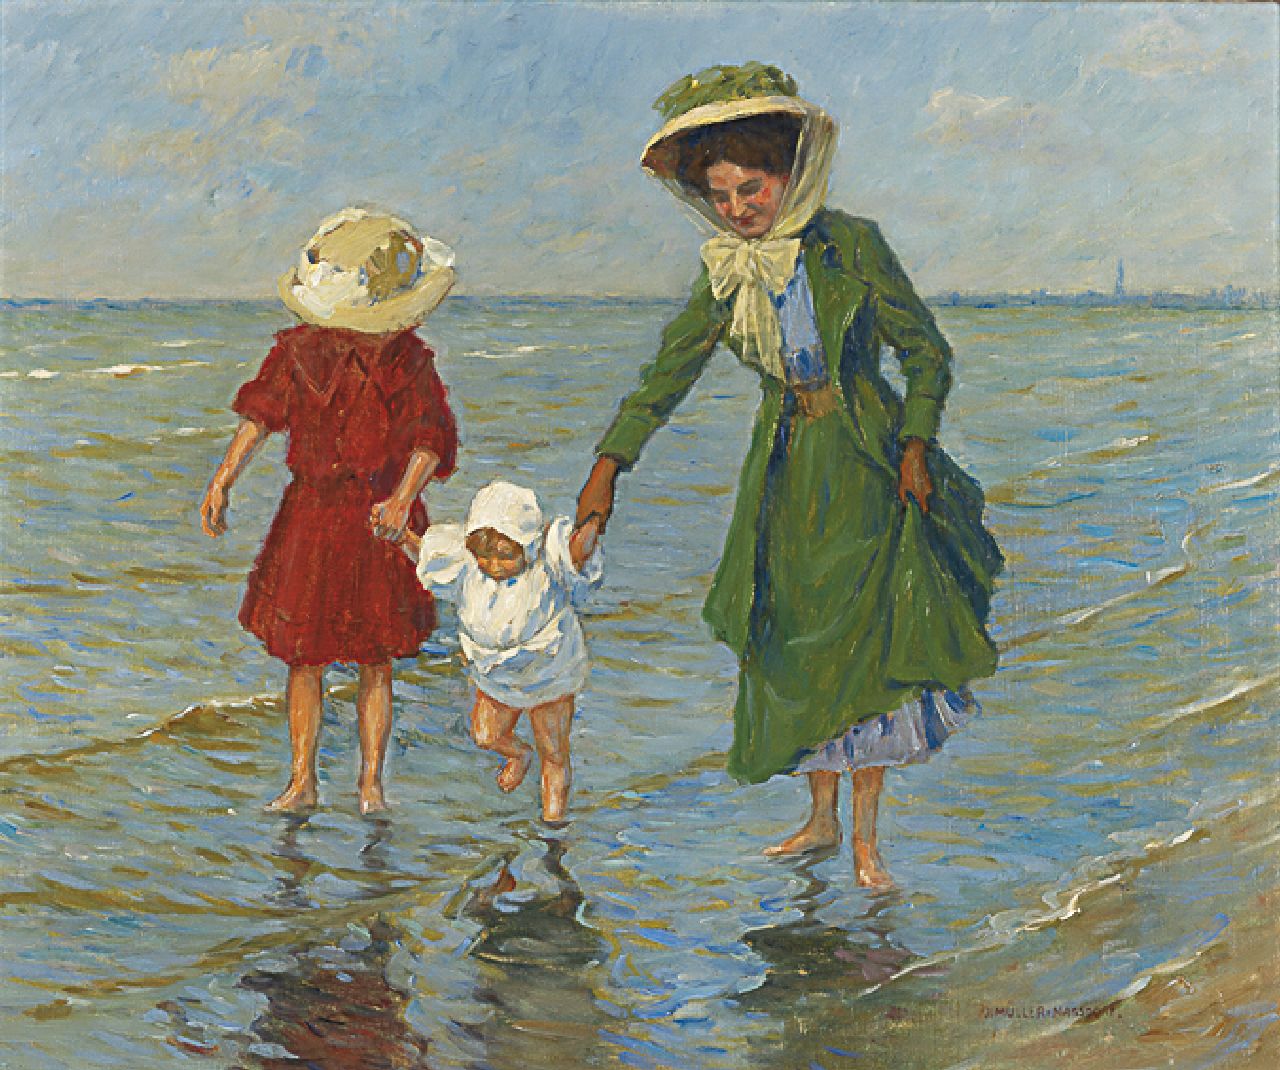 Müller-Massdorf J.  | Julius Müller-Massdorf, Paddling, oil on canvas 45.7 x 56.0 cm, signed l.r. and dated June 1928 on the reverse